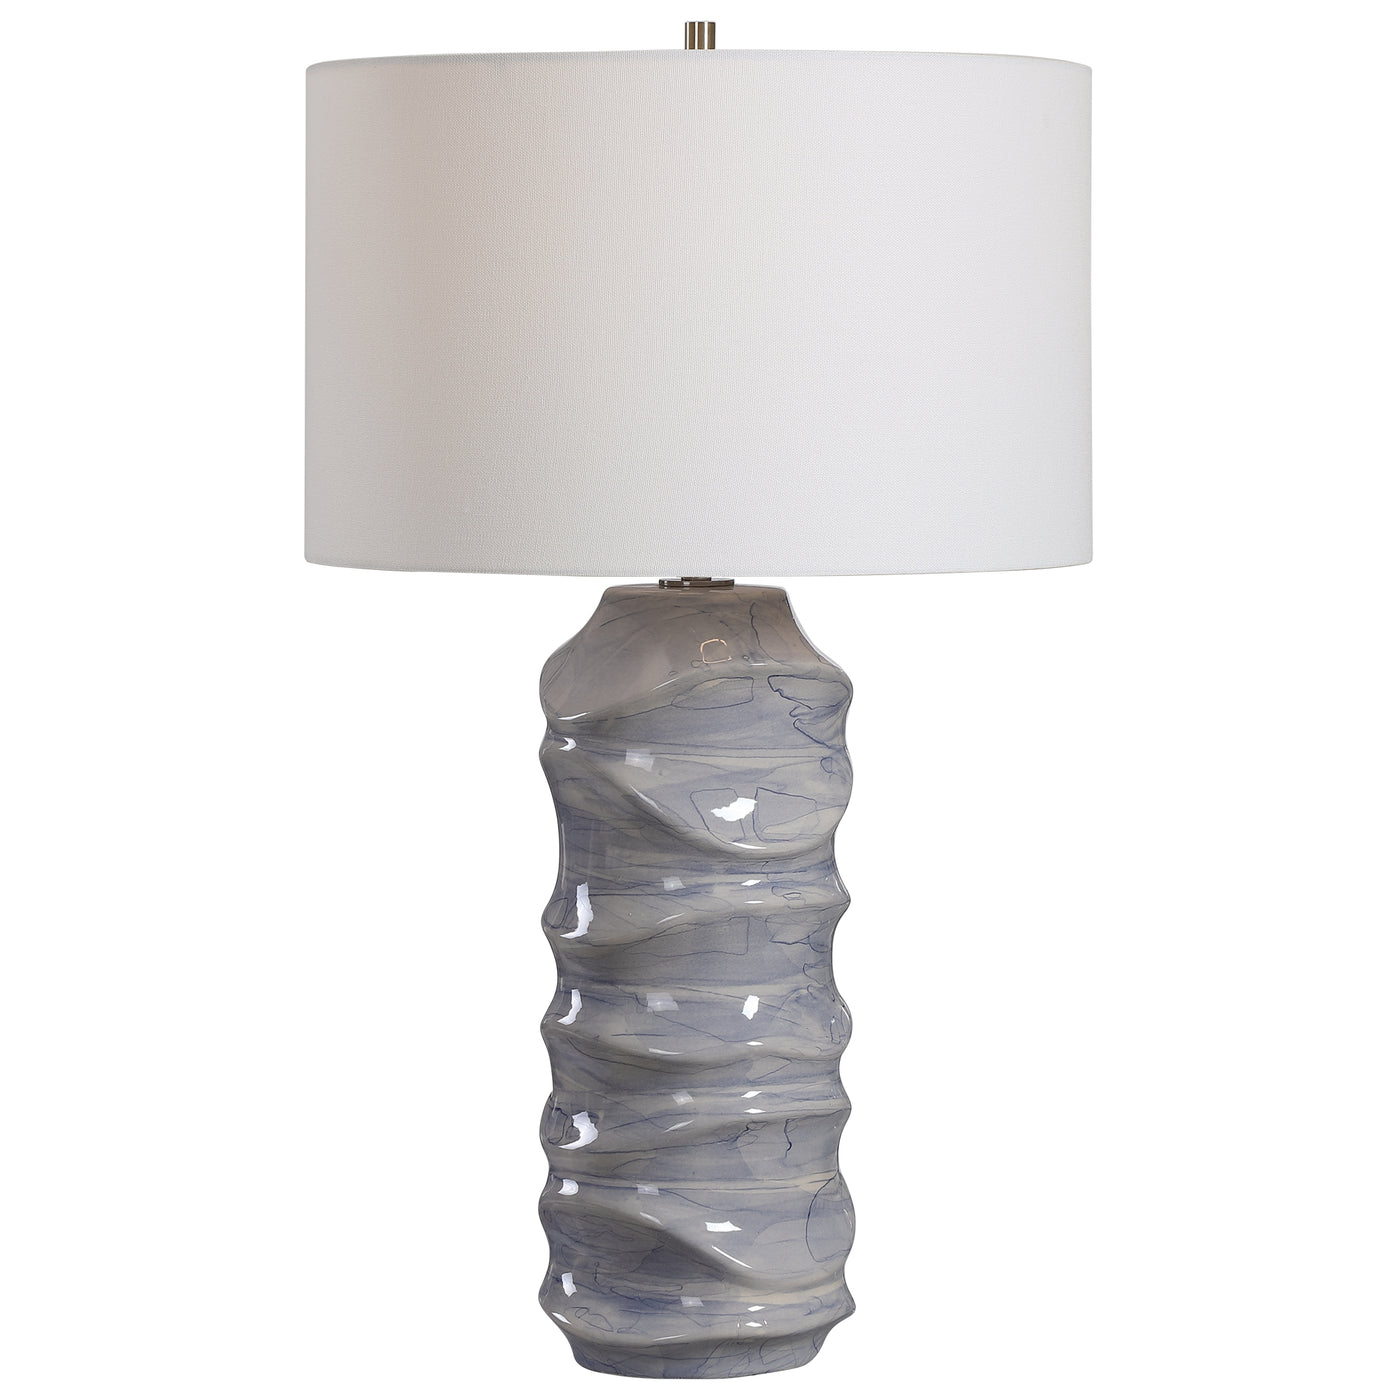 A Contemporary Take On Classic Blue And White Ceramics, This Table Lamp Features A Unique Sculpted Design With A Hand Appl...